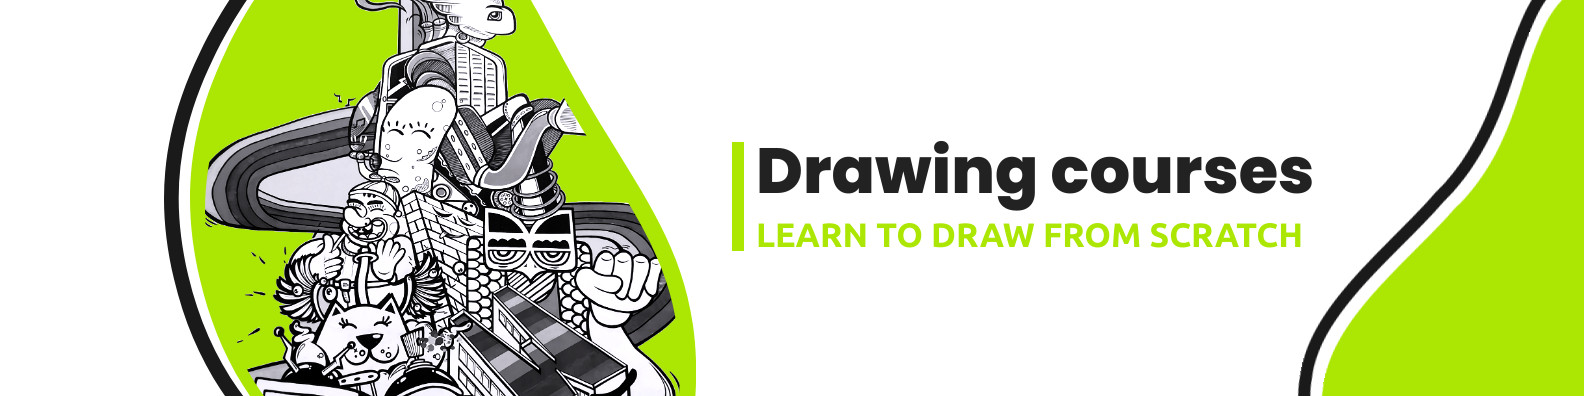 Learn to Draw from Scratch Linkedin Profile BG